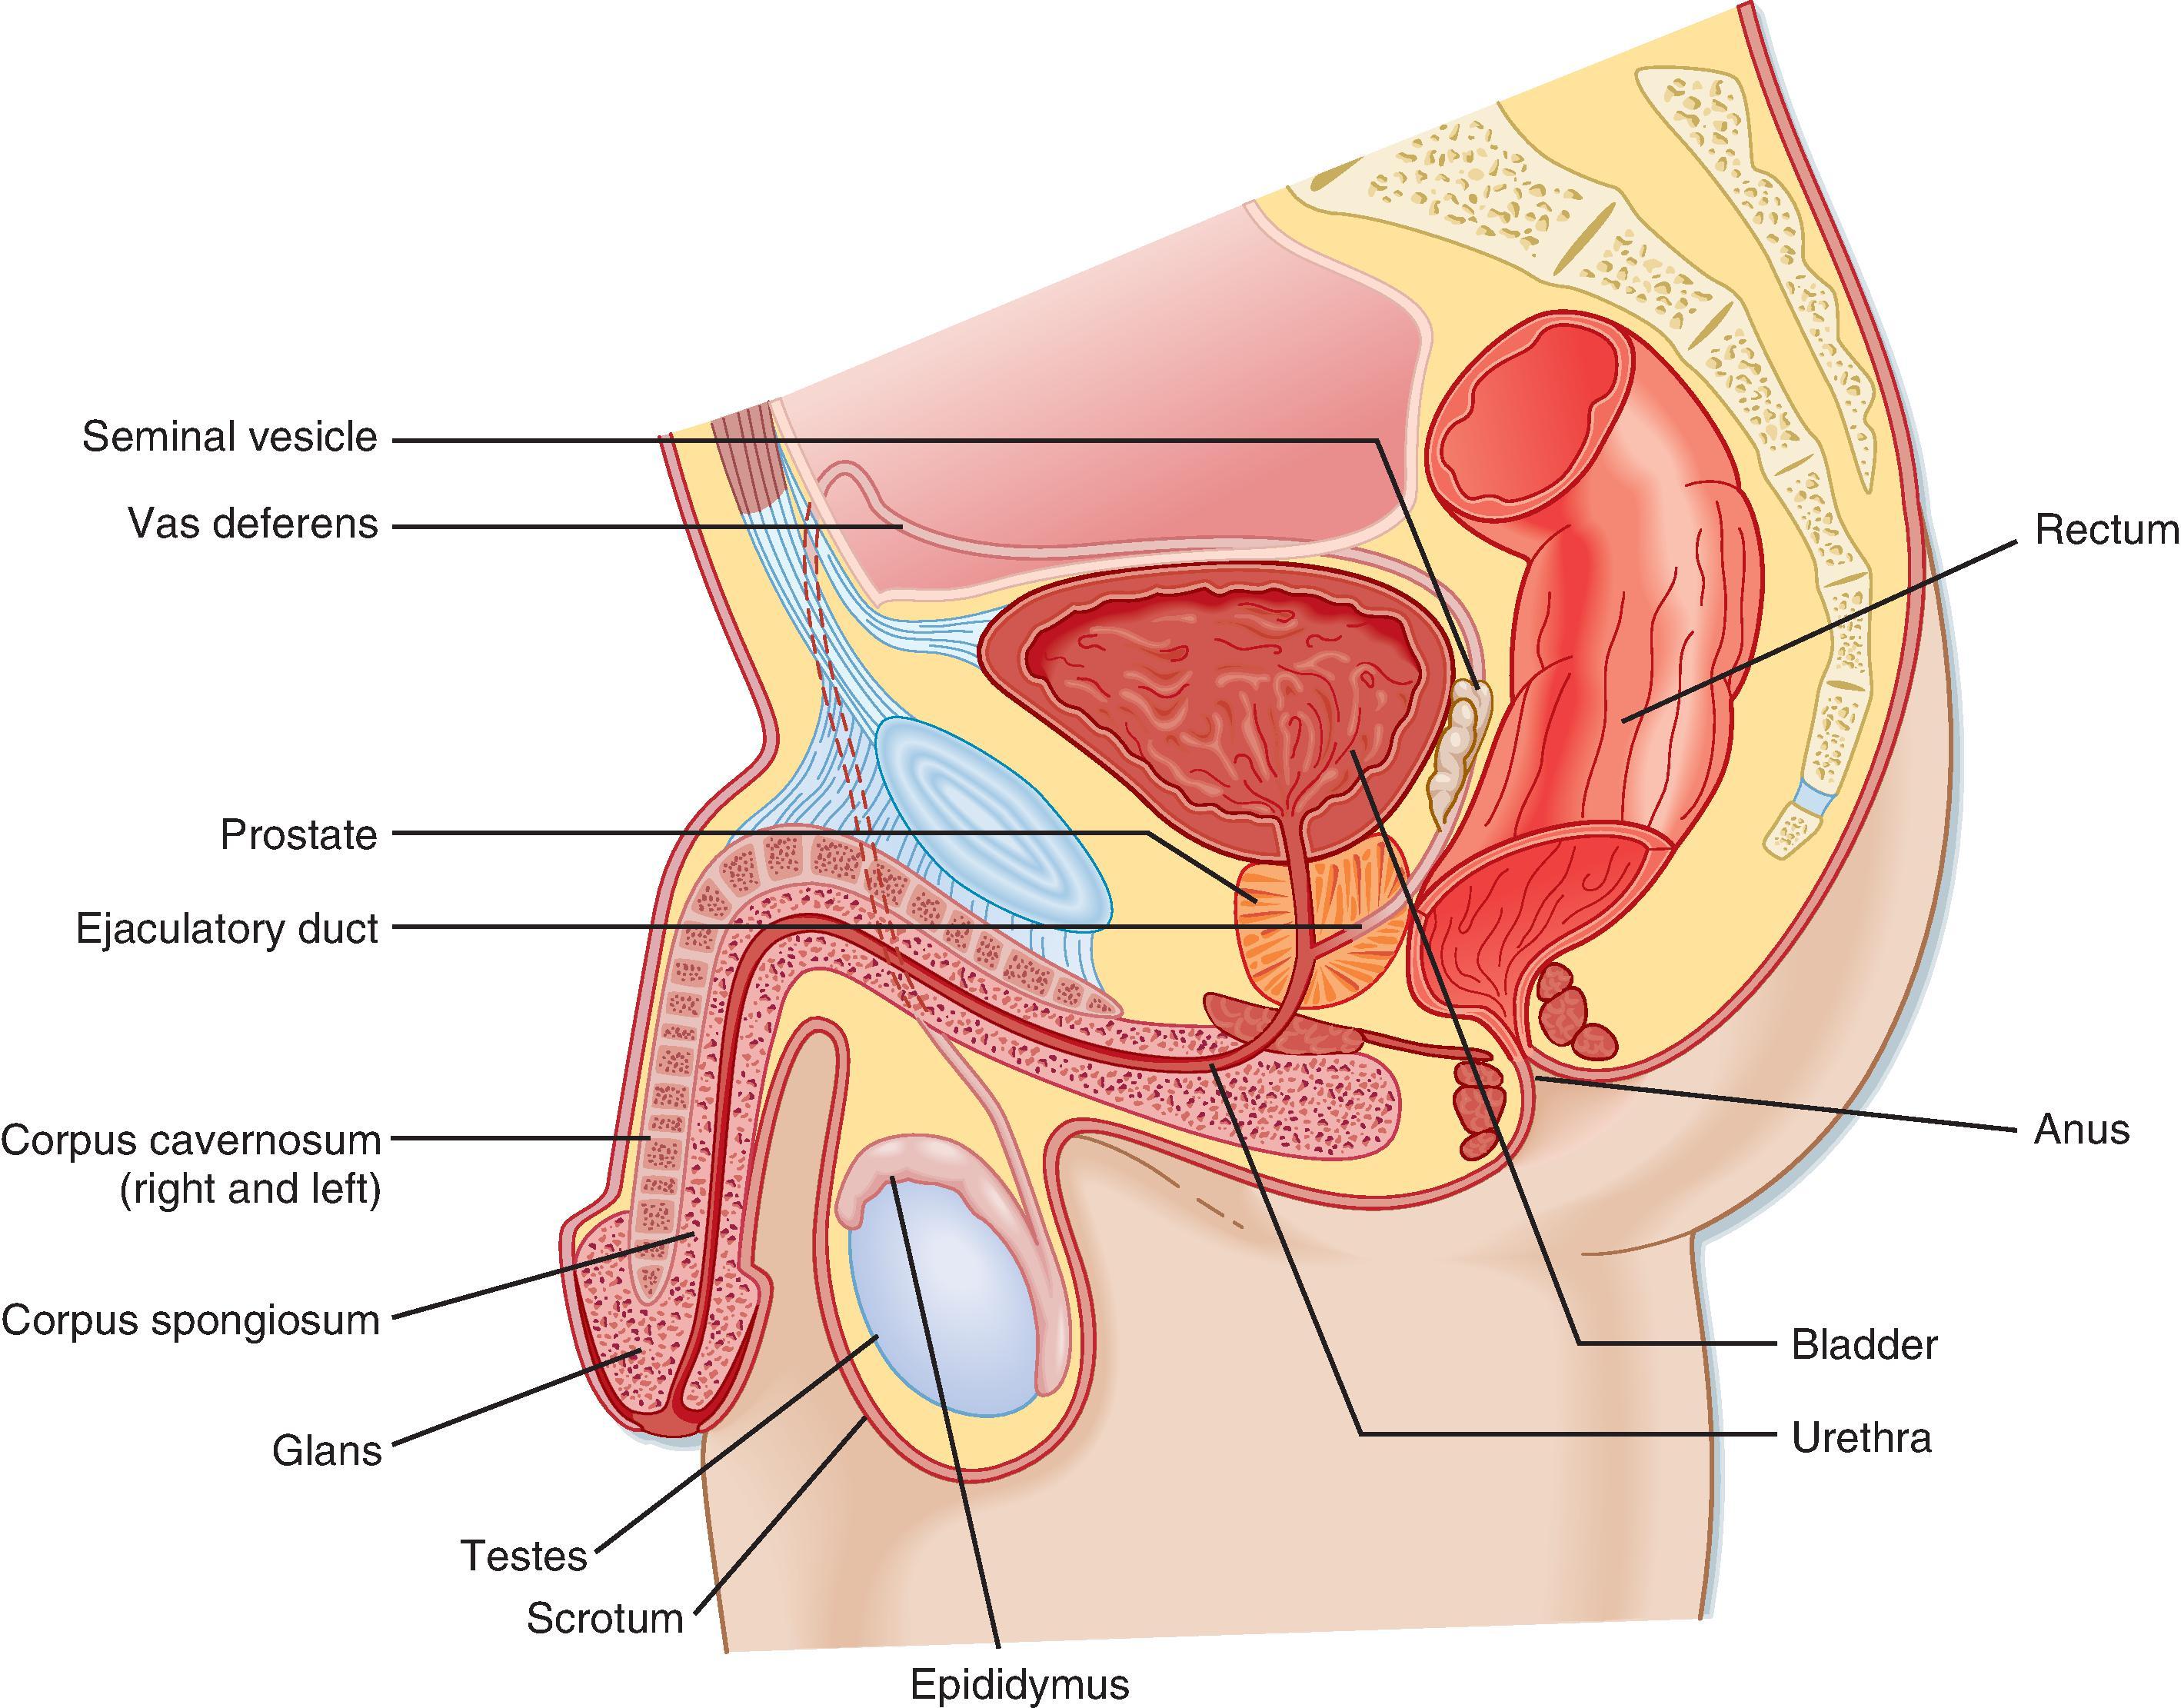 Fig. 44.1, Anatomy of the male reproductive system.